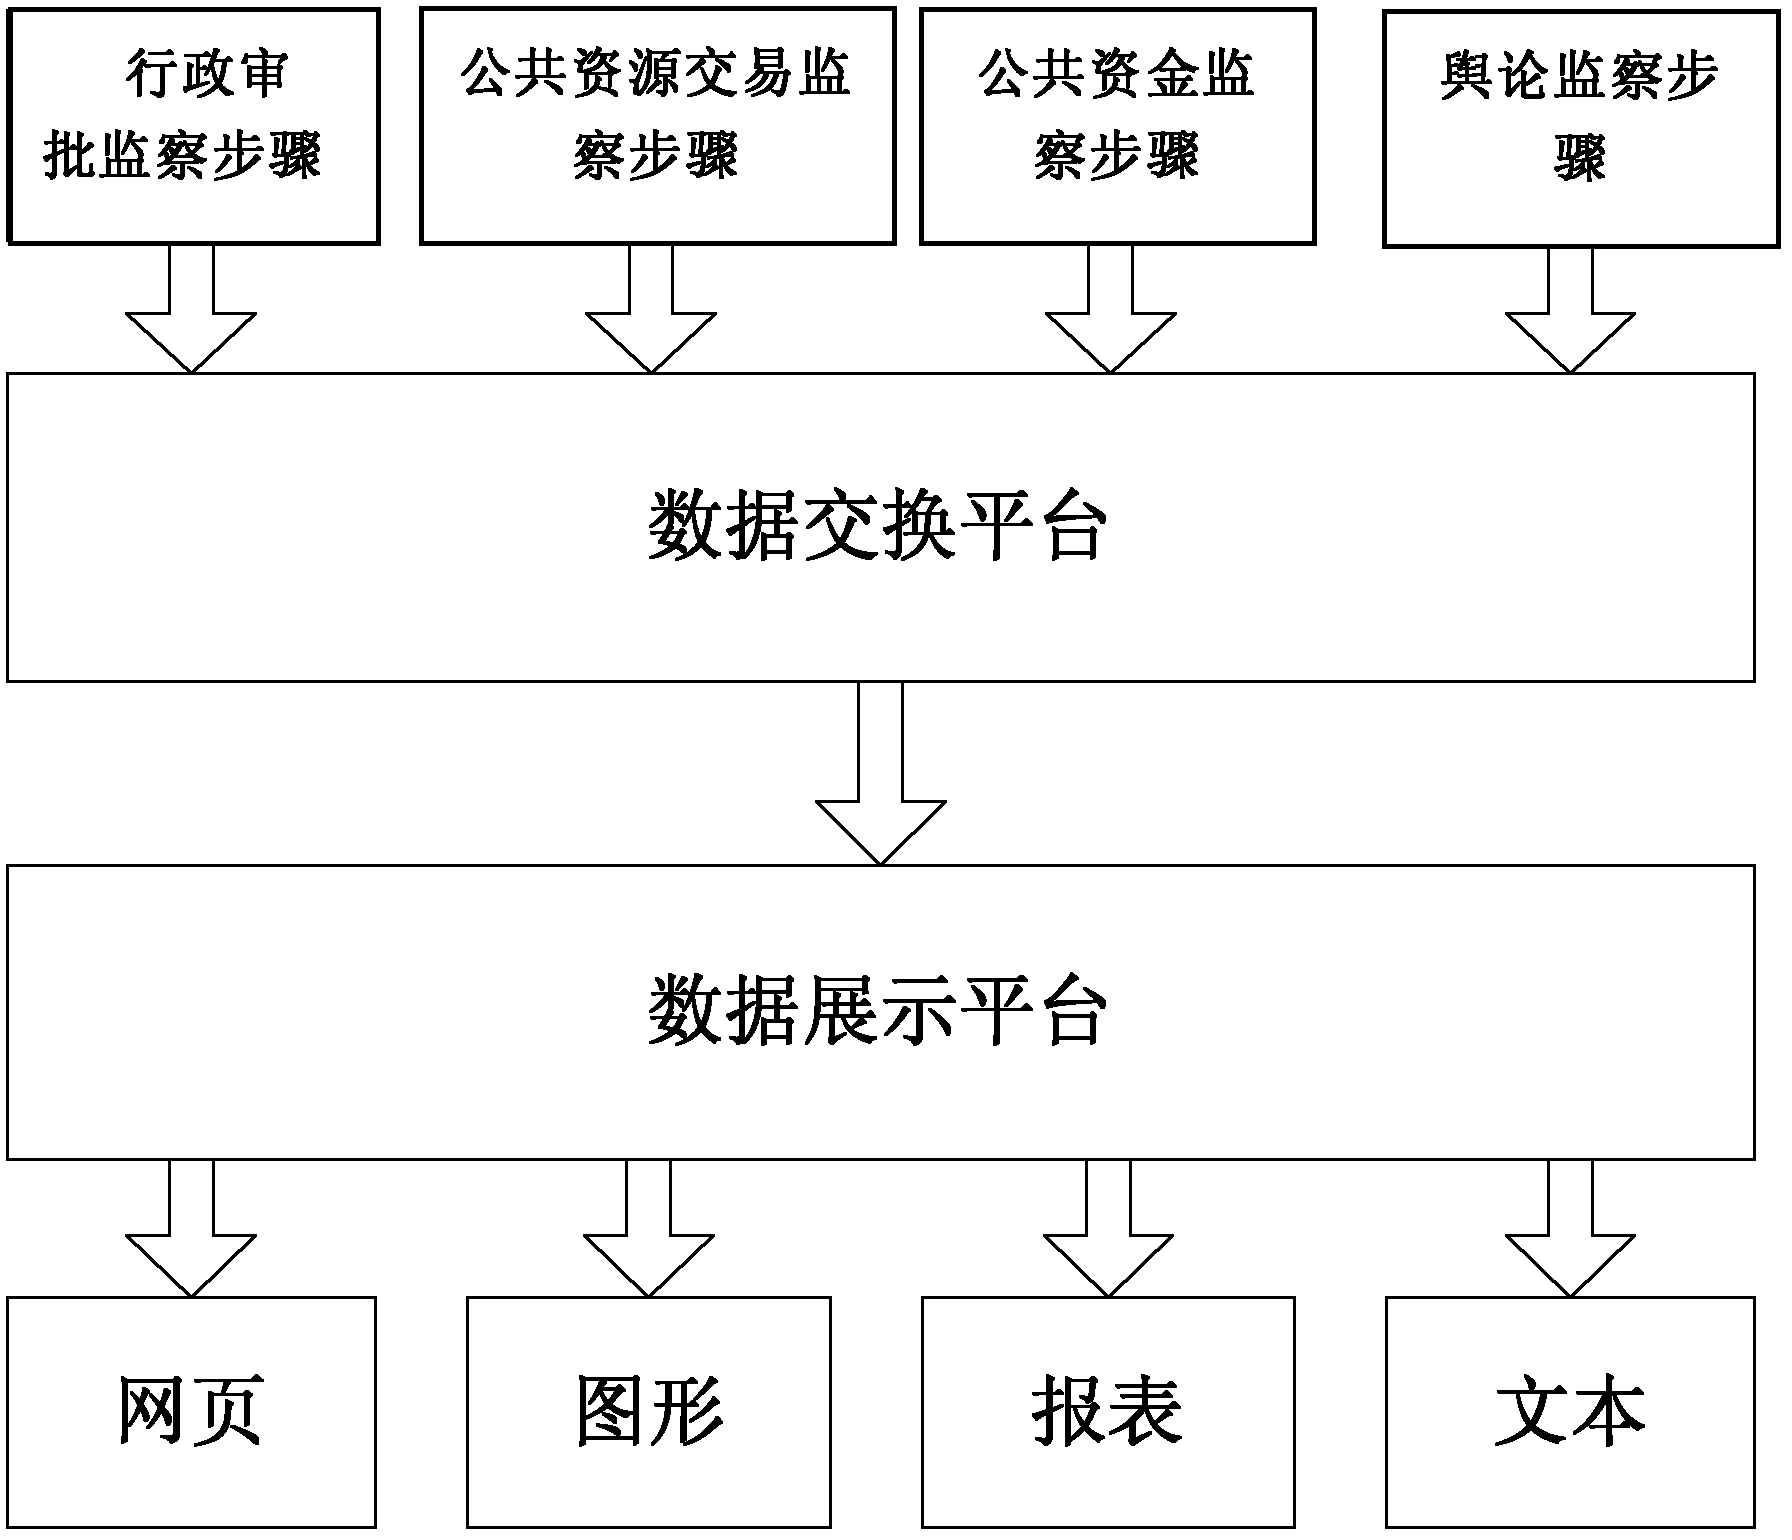 Electronic supervision method